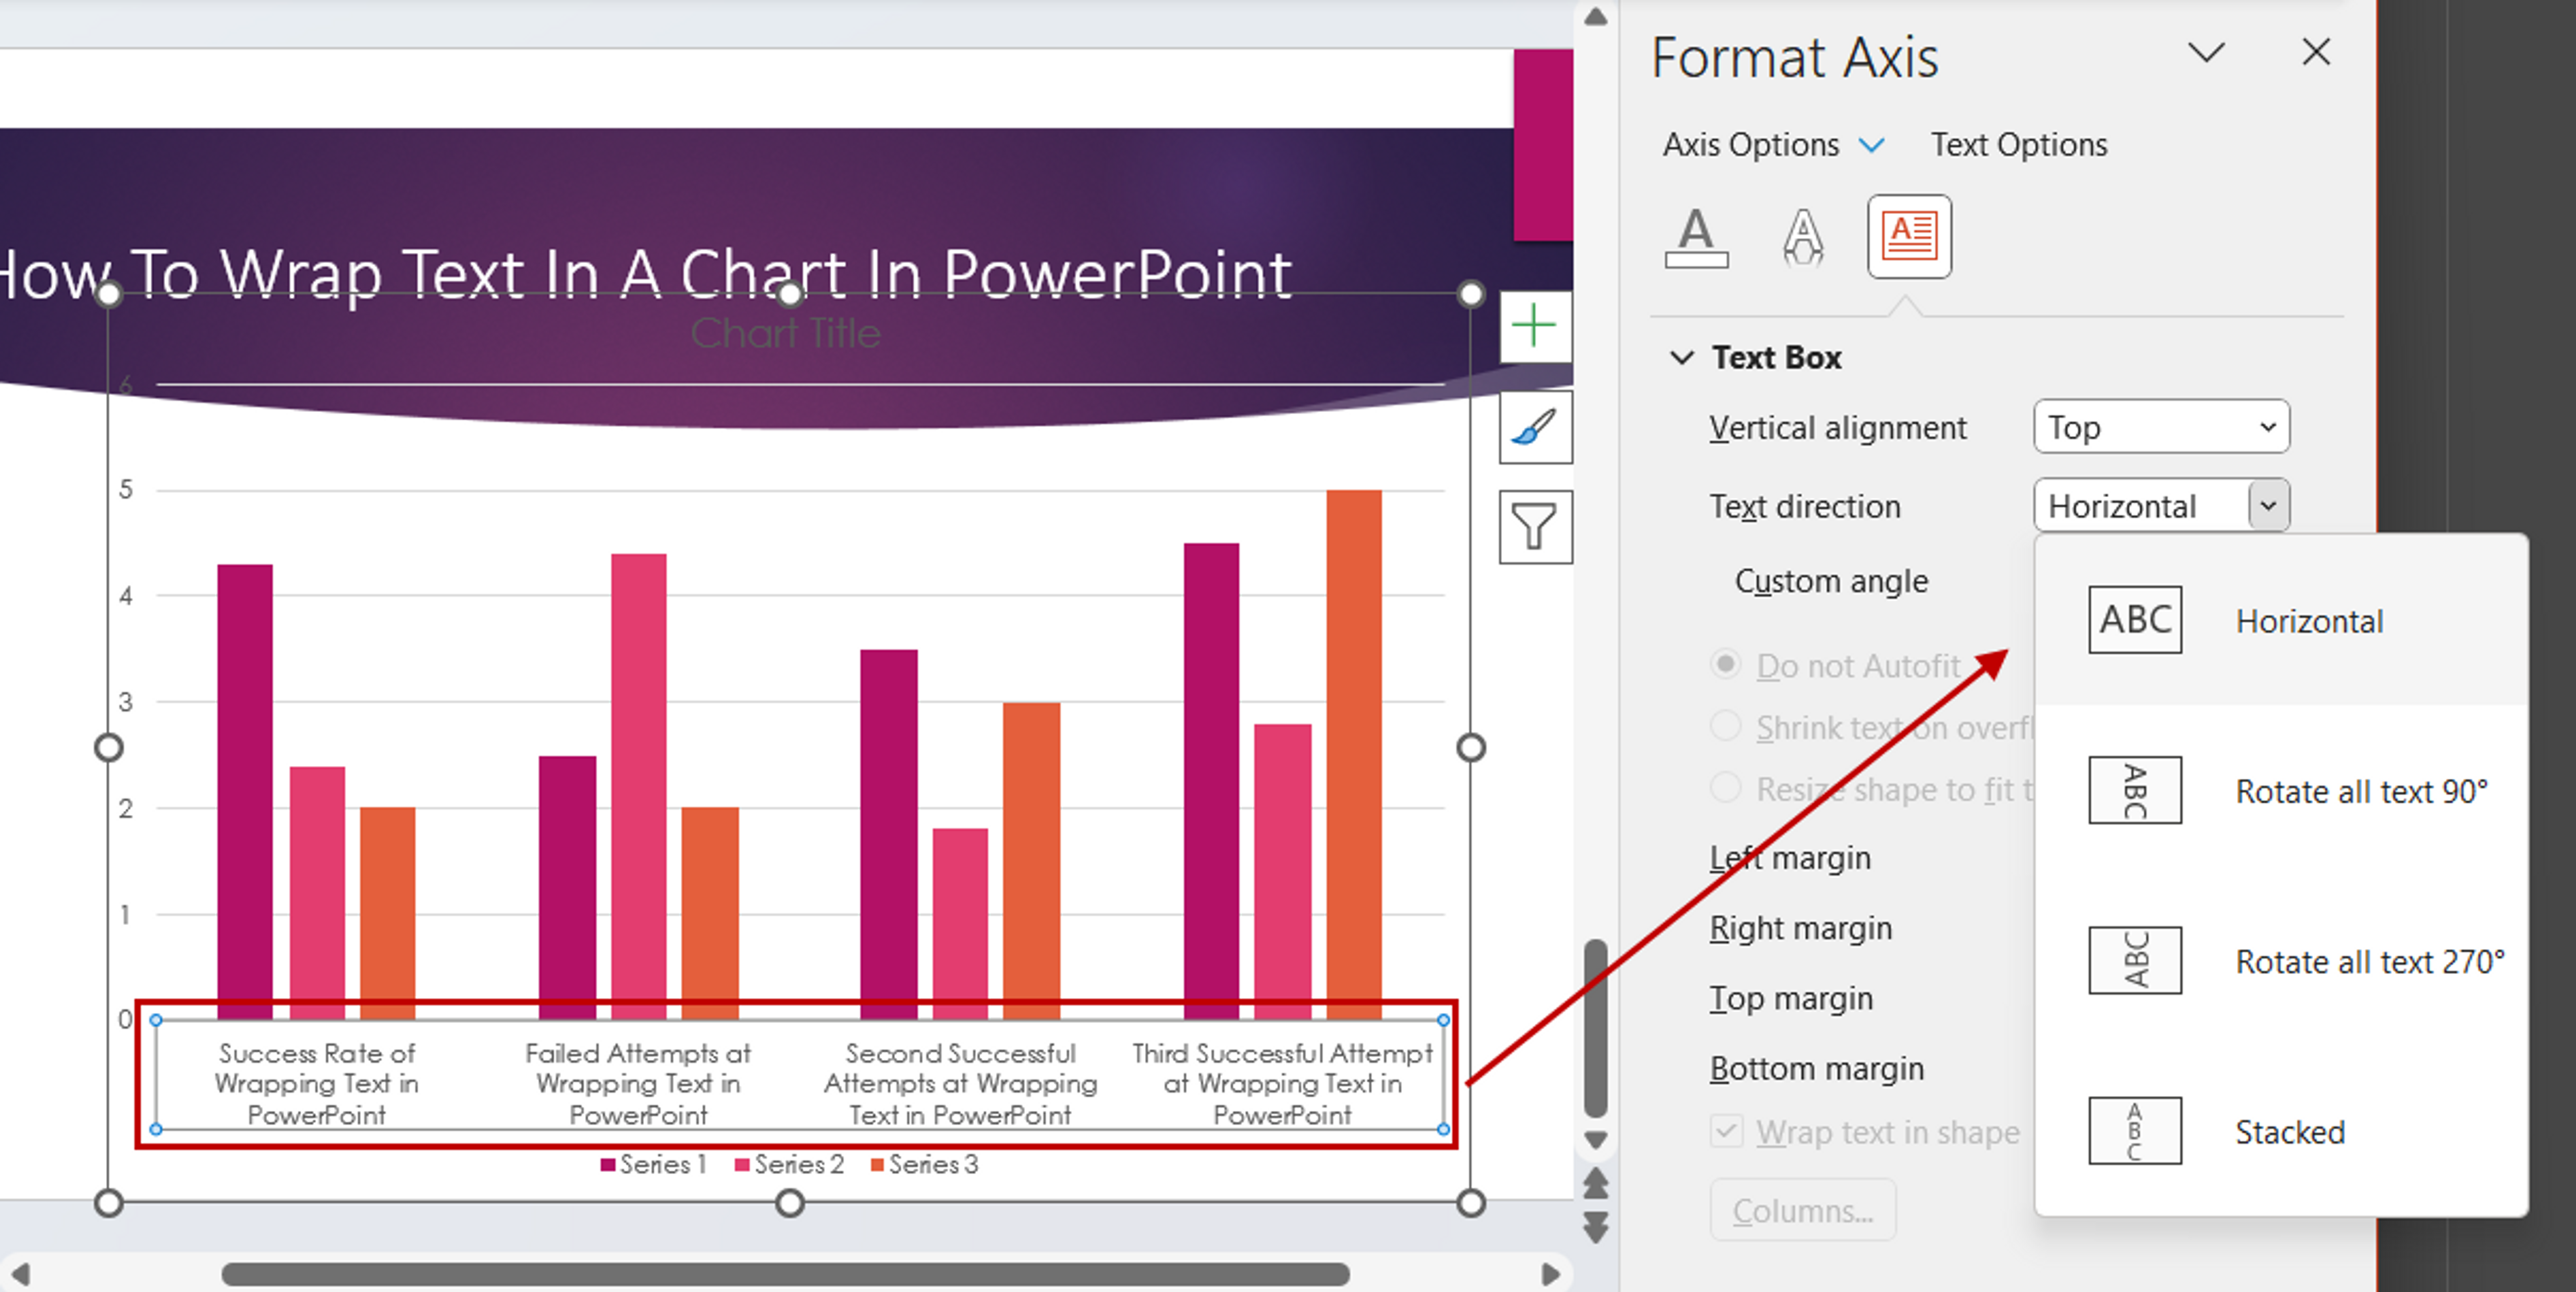 Options for customizing chart labels and text boxes in MS PowerPoint